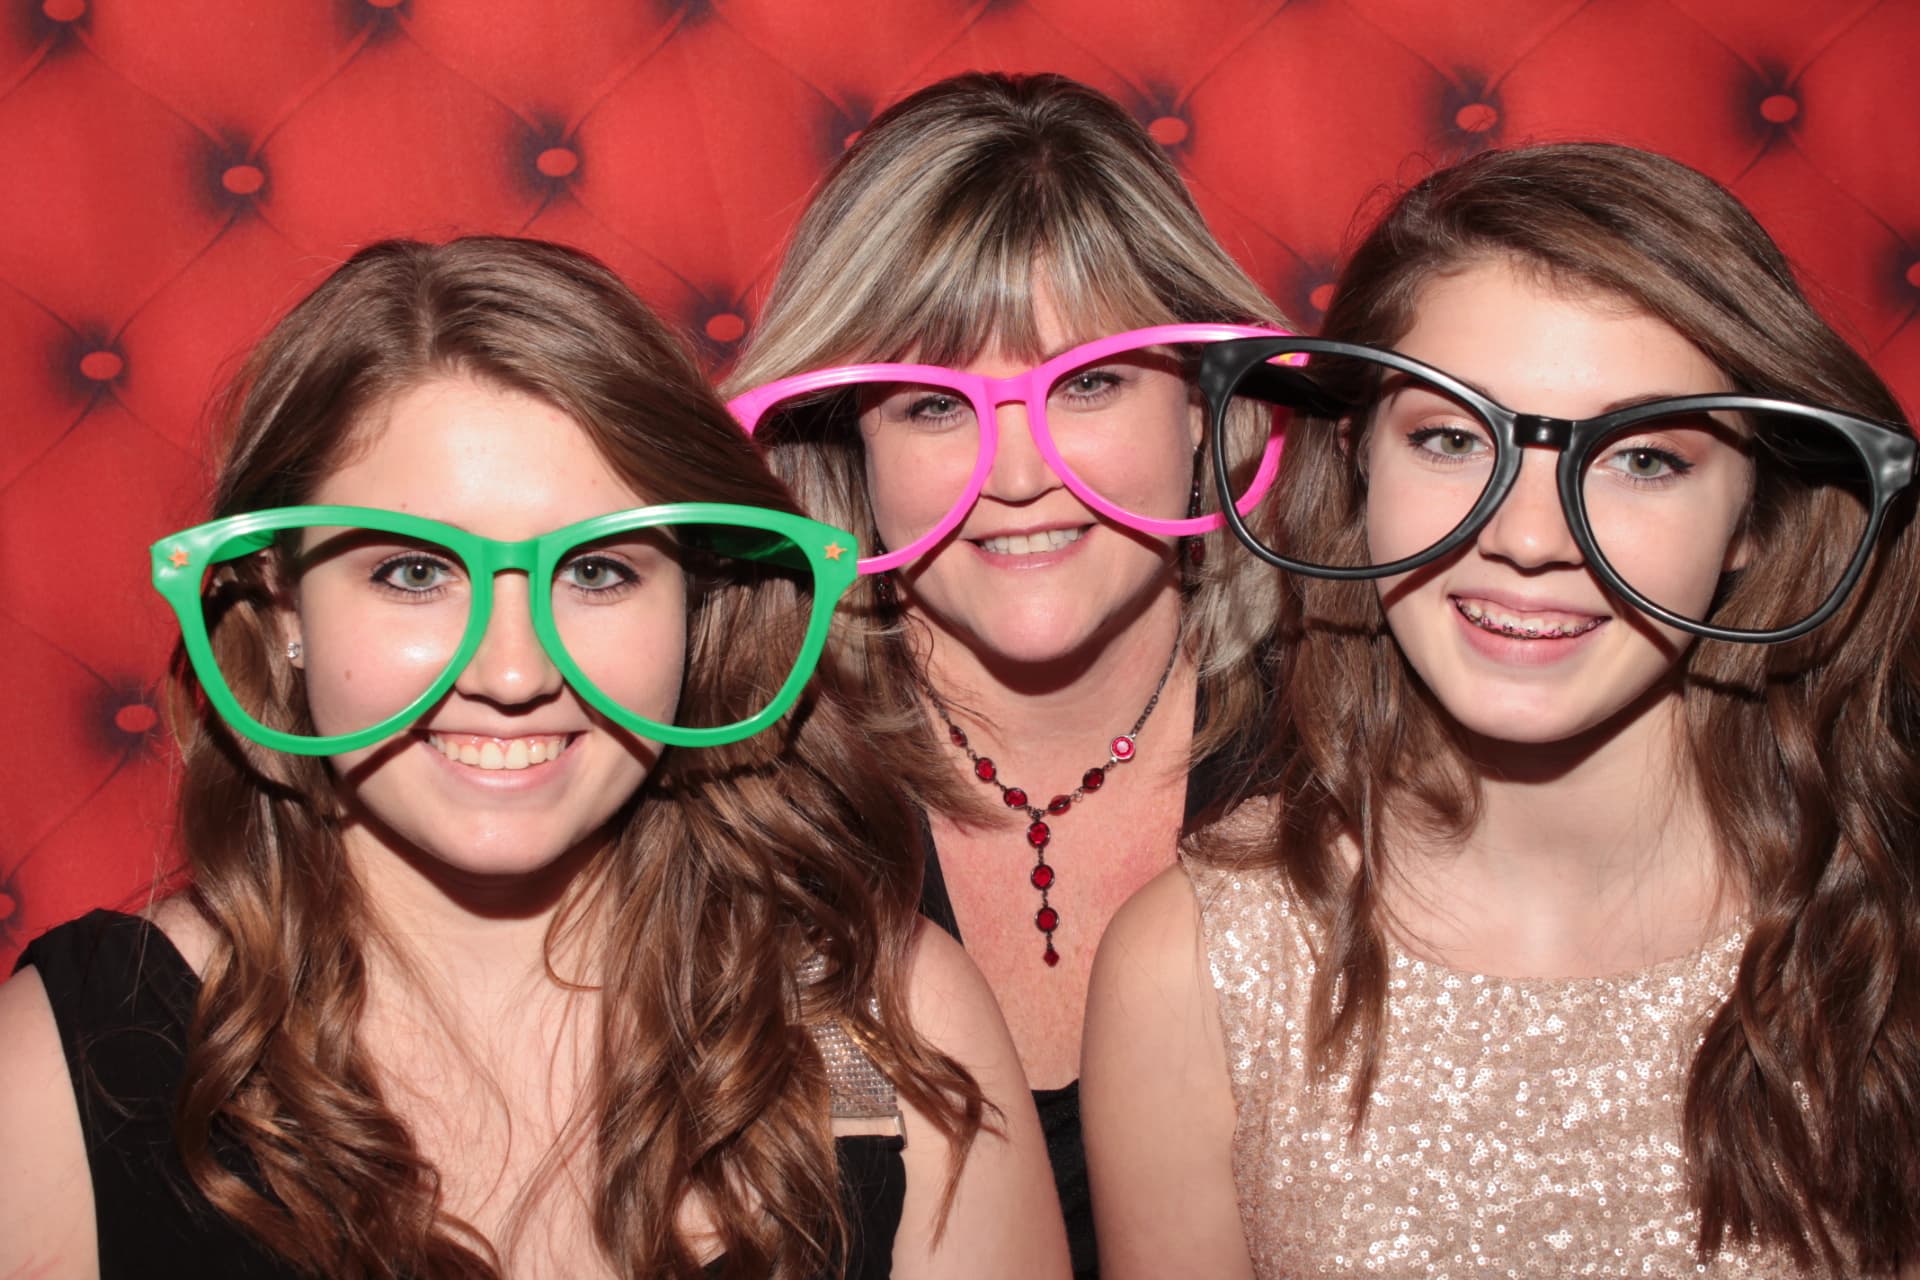 Photo Booth-Rental-No.1-Austin-Horseshoe Bay-Quali Point-Wedding-Memories-Awesome-Props